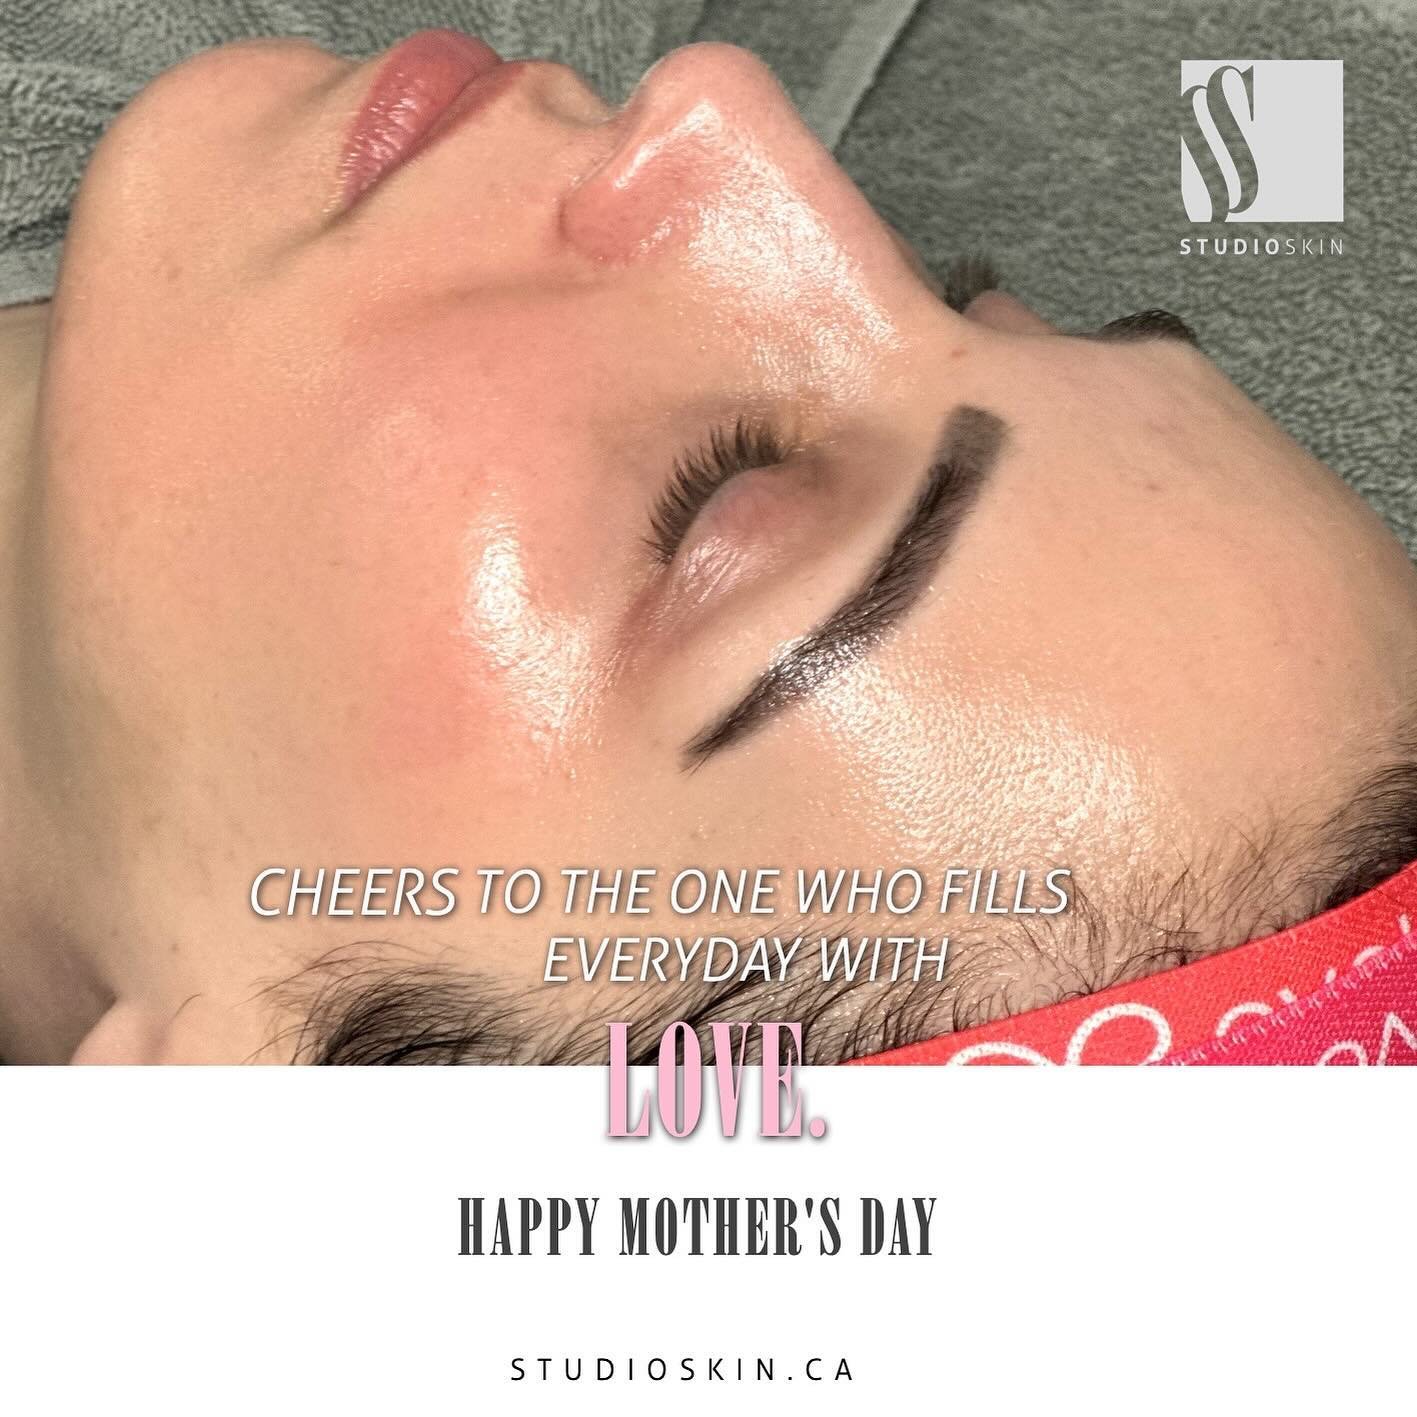 Mother&rsquo;s Day is the perfect time to celebrate the extraordinary women who shape our lives with love, wisdom, and endless devotion. 
Show your appreciation with a heartfelt gift that speaks volumes of your gratitude. Because every mom deserves t